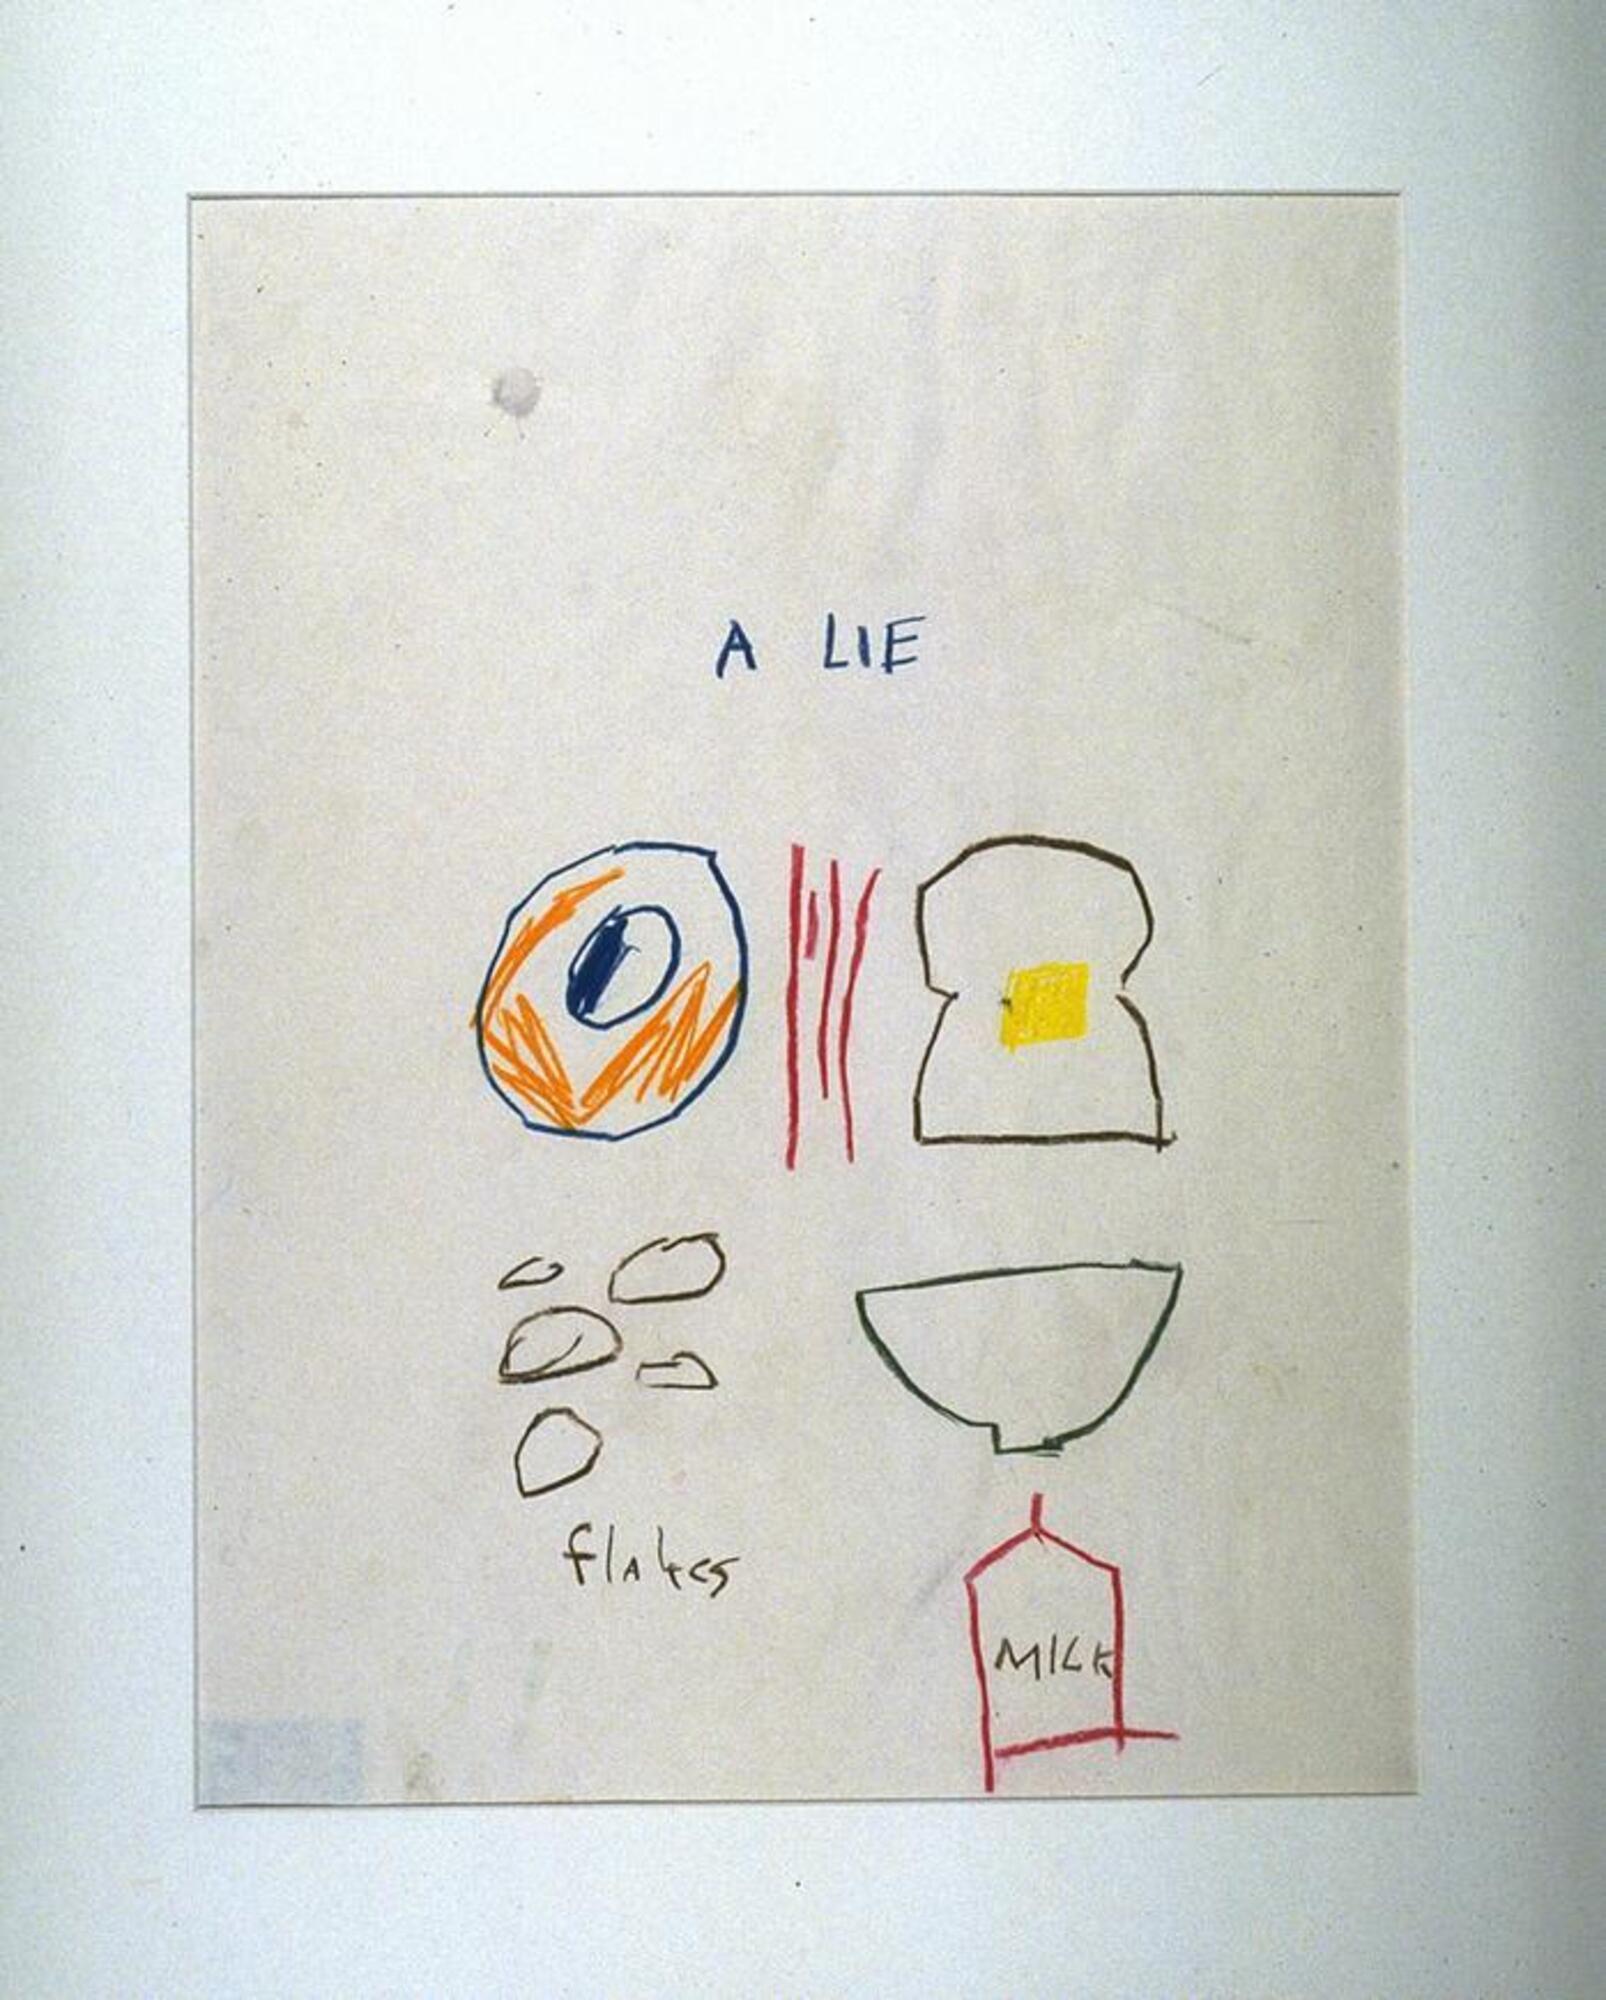 This is a line drawing done in colors of red, orange, blue, yellow, brown and green, on white paper. In the top center portion of the sheet are the words, "A LIE". Below this are forms that resemble an egg, a slice of bacon, a piece of bread with a pat of yellow butter. Below these forms are some round shapes, labeled "flakes", a bowl and a carton of milk, labeled "milk".